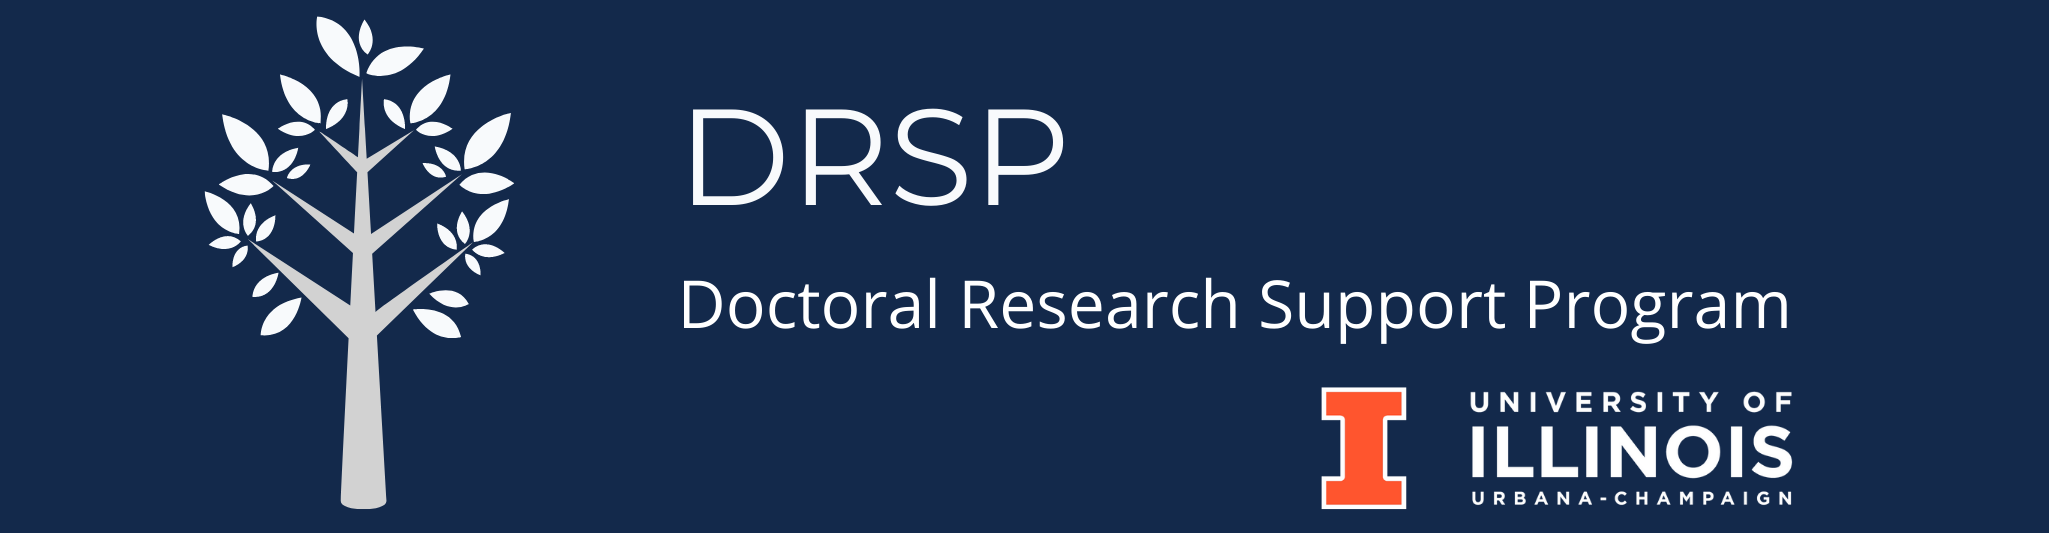 Descriptive image. Grey stylized tree on dark blue background. Text reads "DRSP: Doctoral Research Support Program."